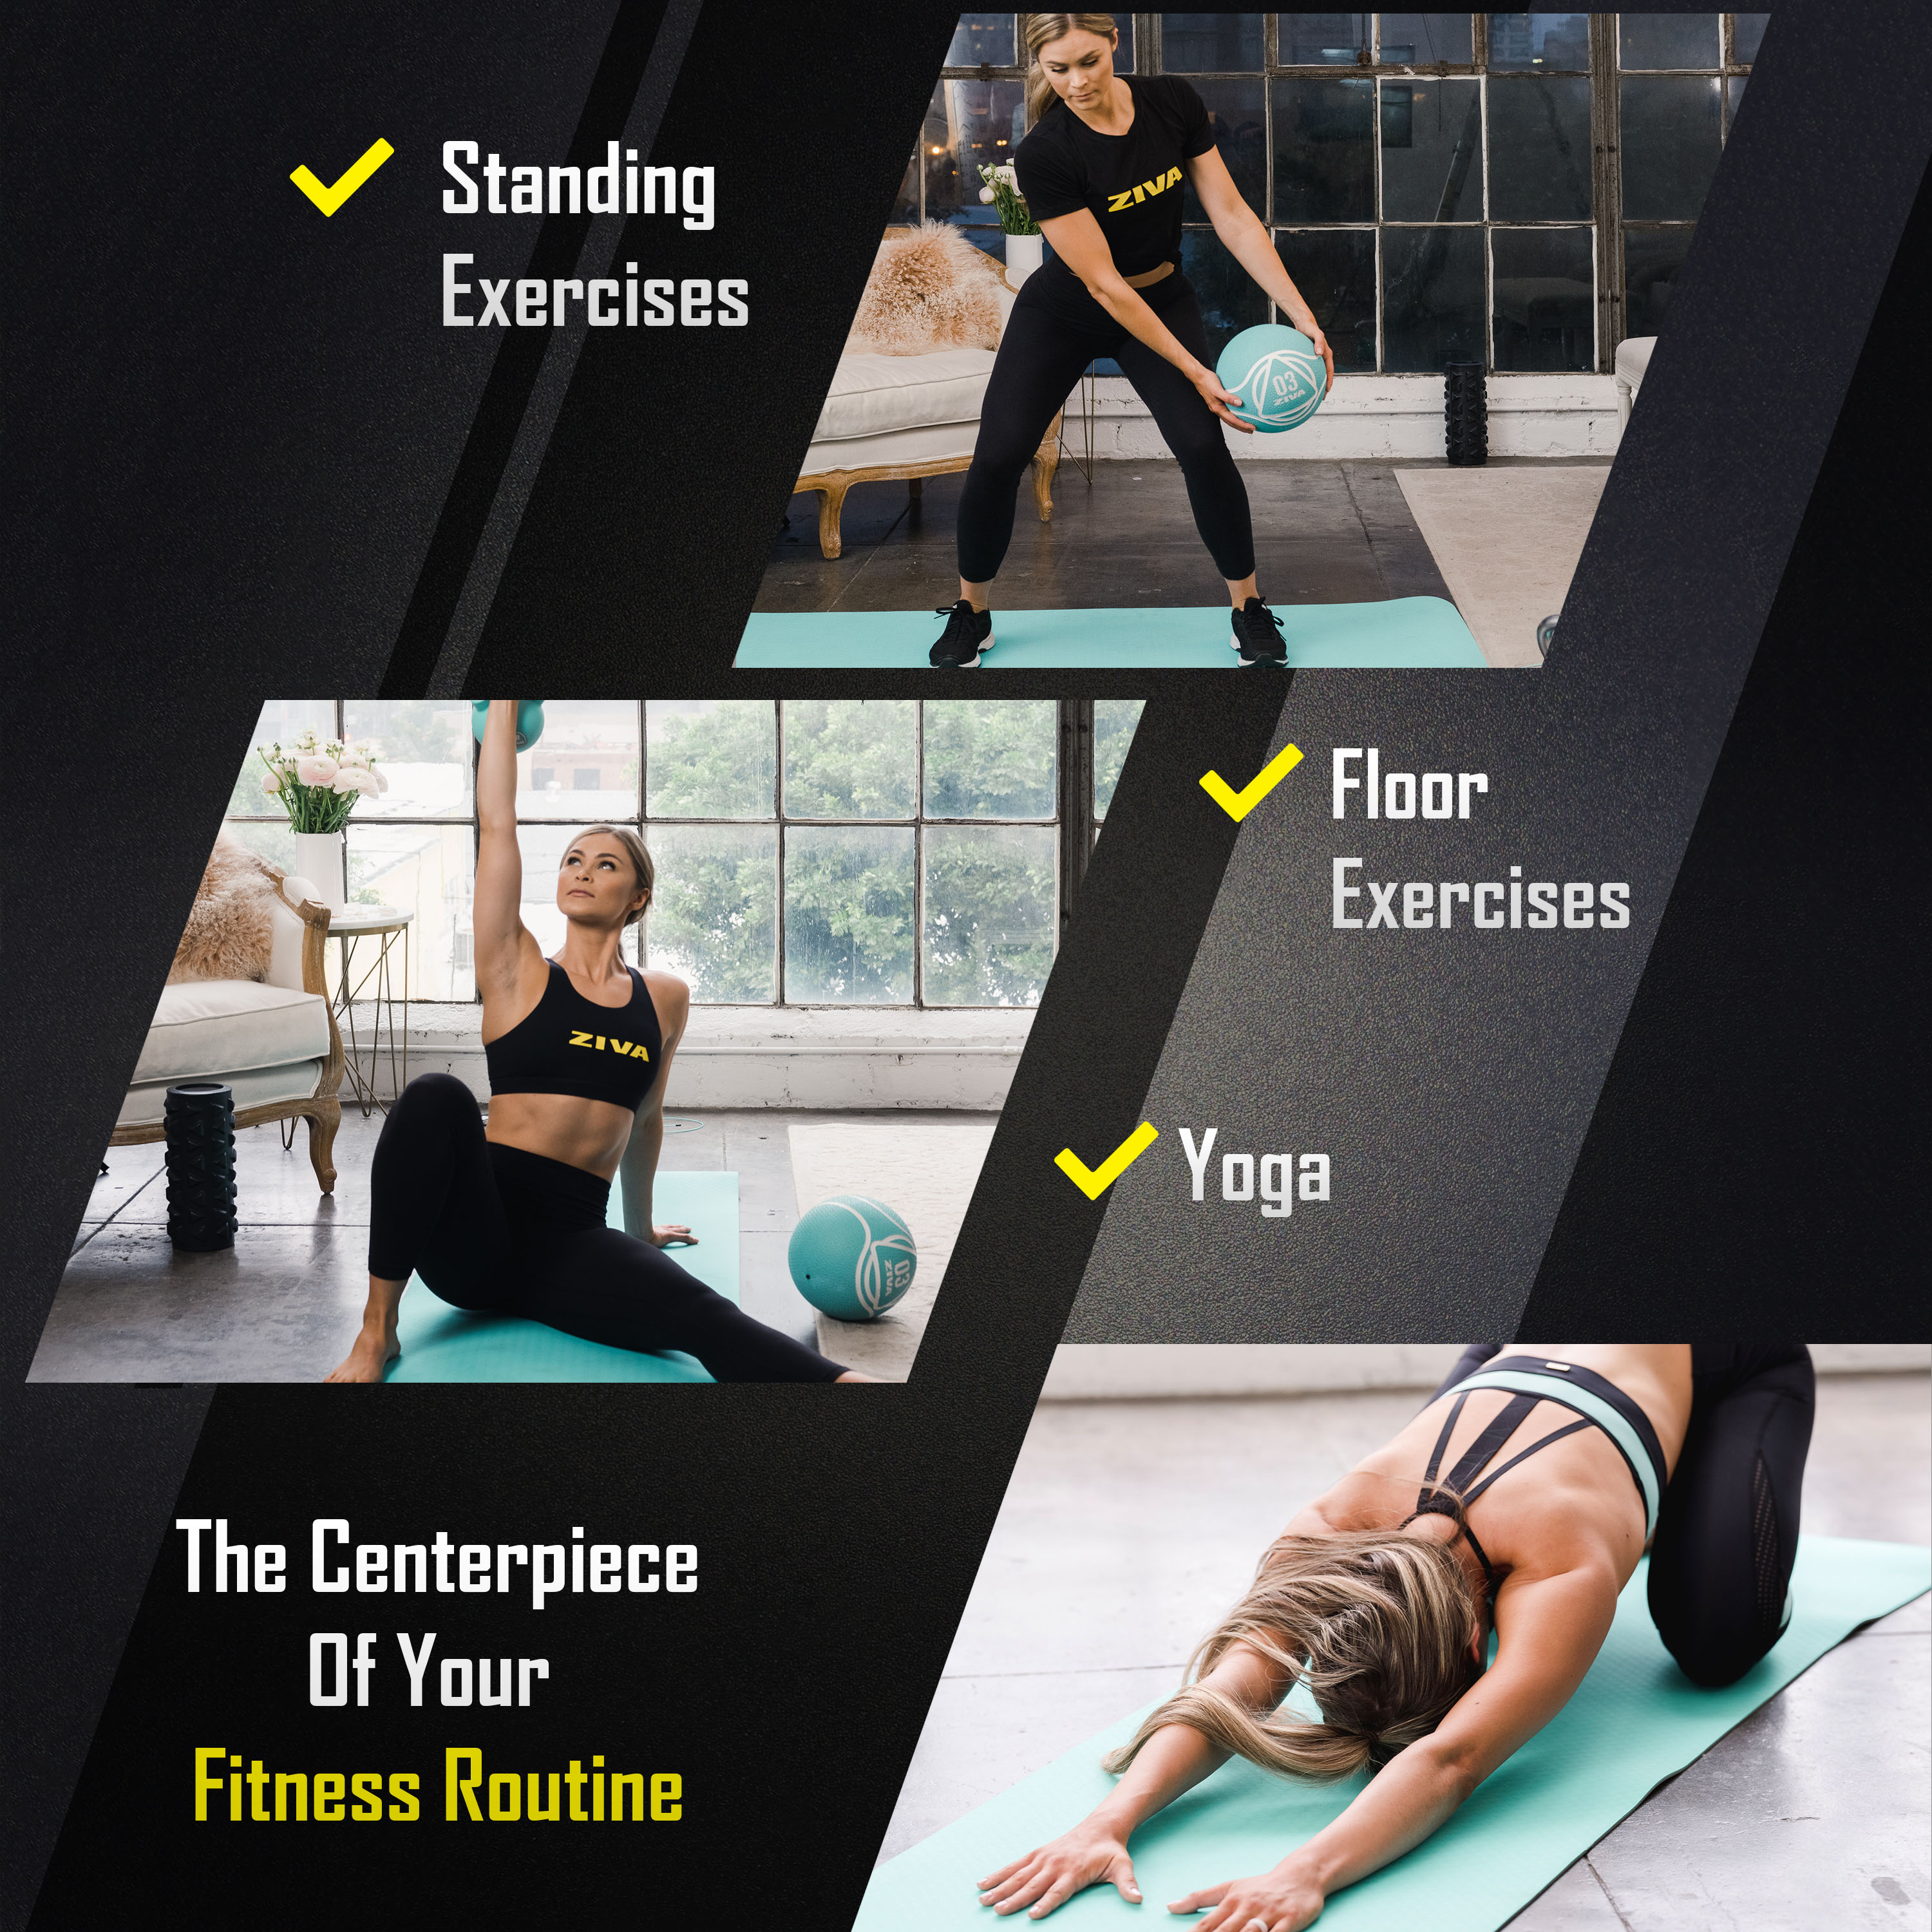 Standing exercises, floor exercises, yoga. The centerpiece of your fitness routine.